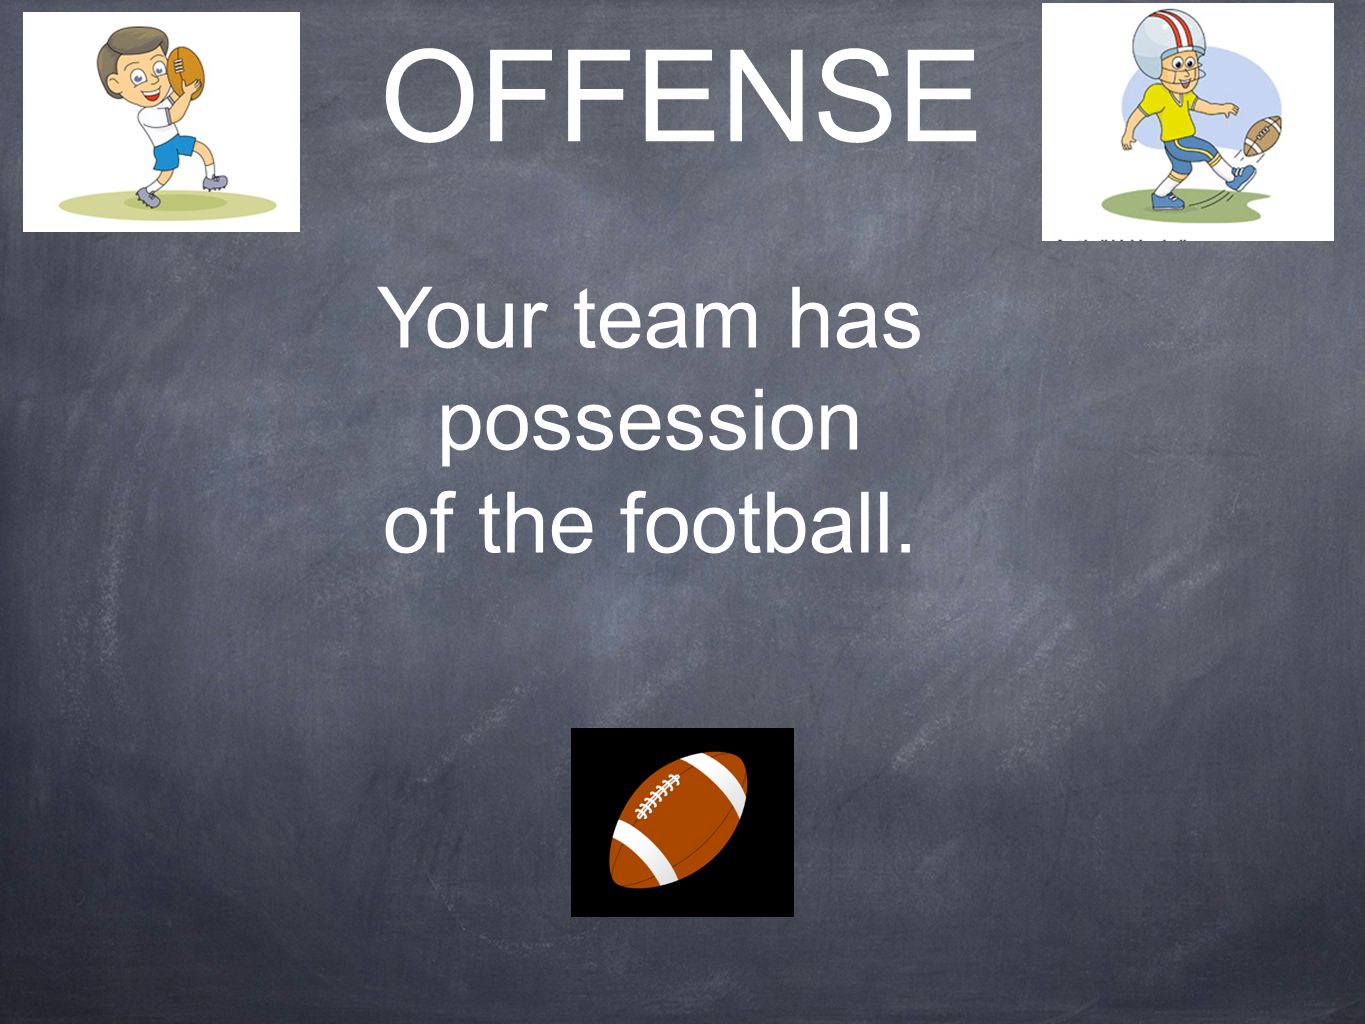 Your team has possession